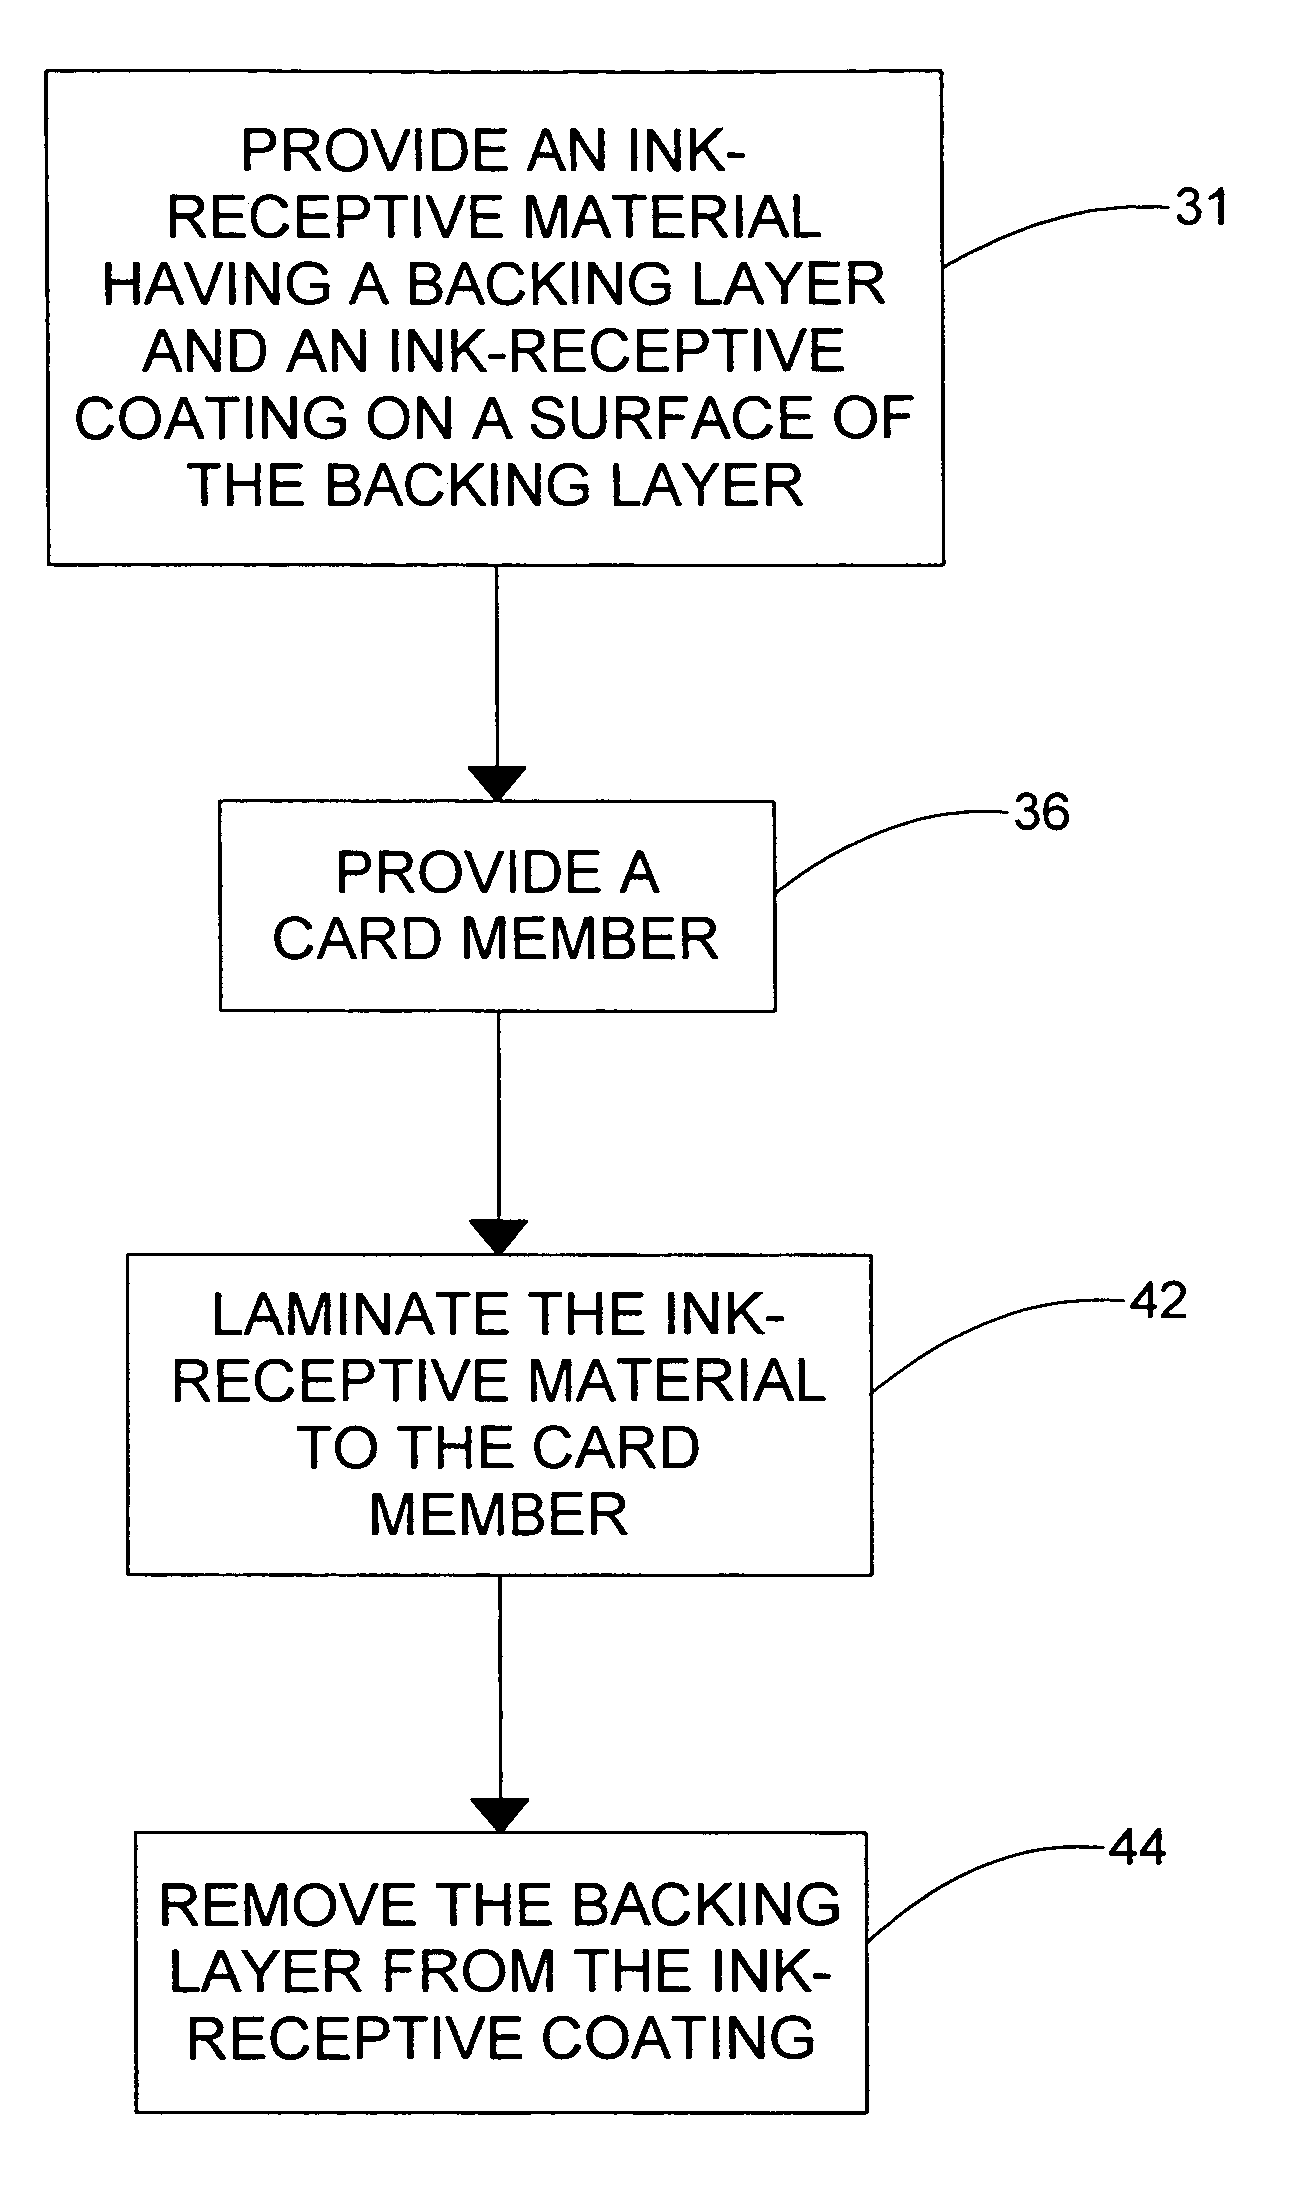 Ink-receptive card substrate